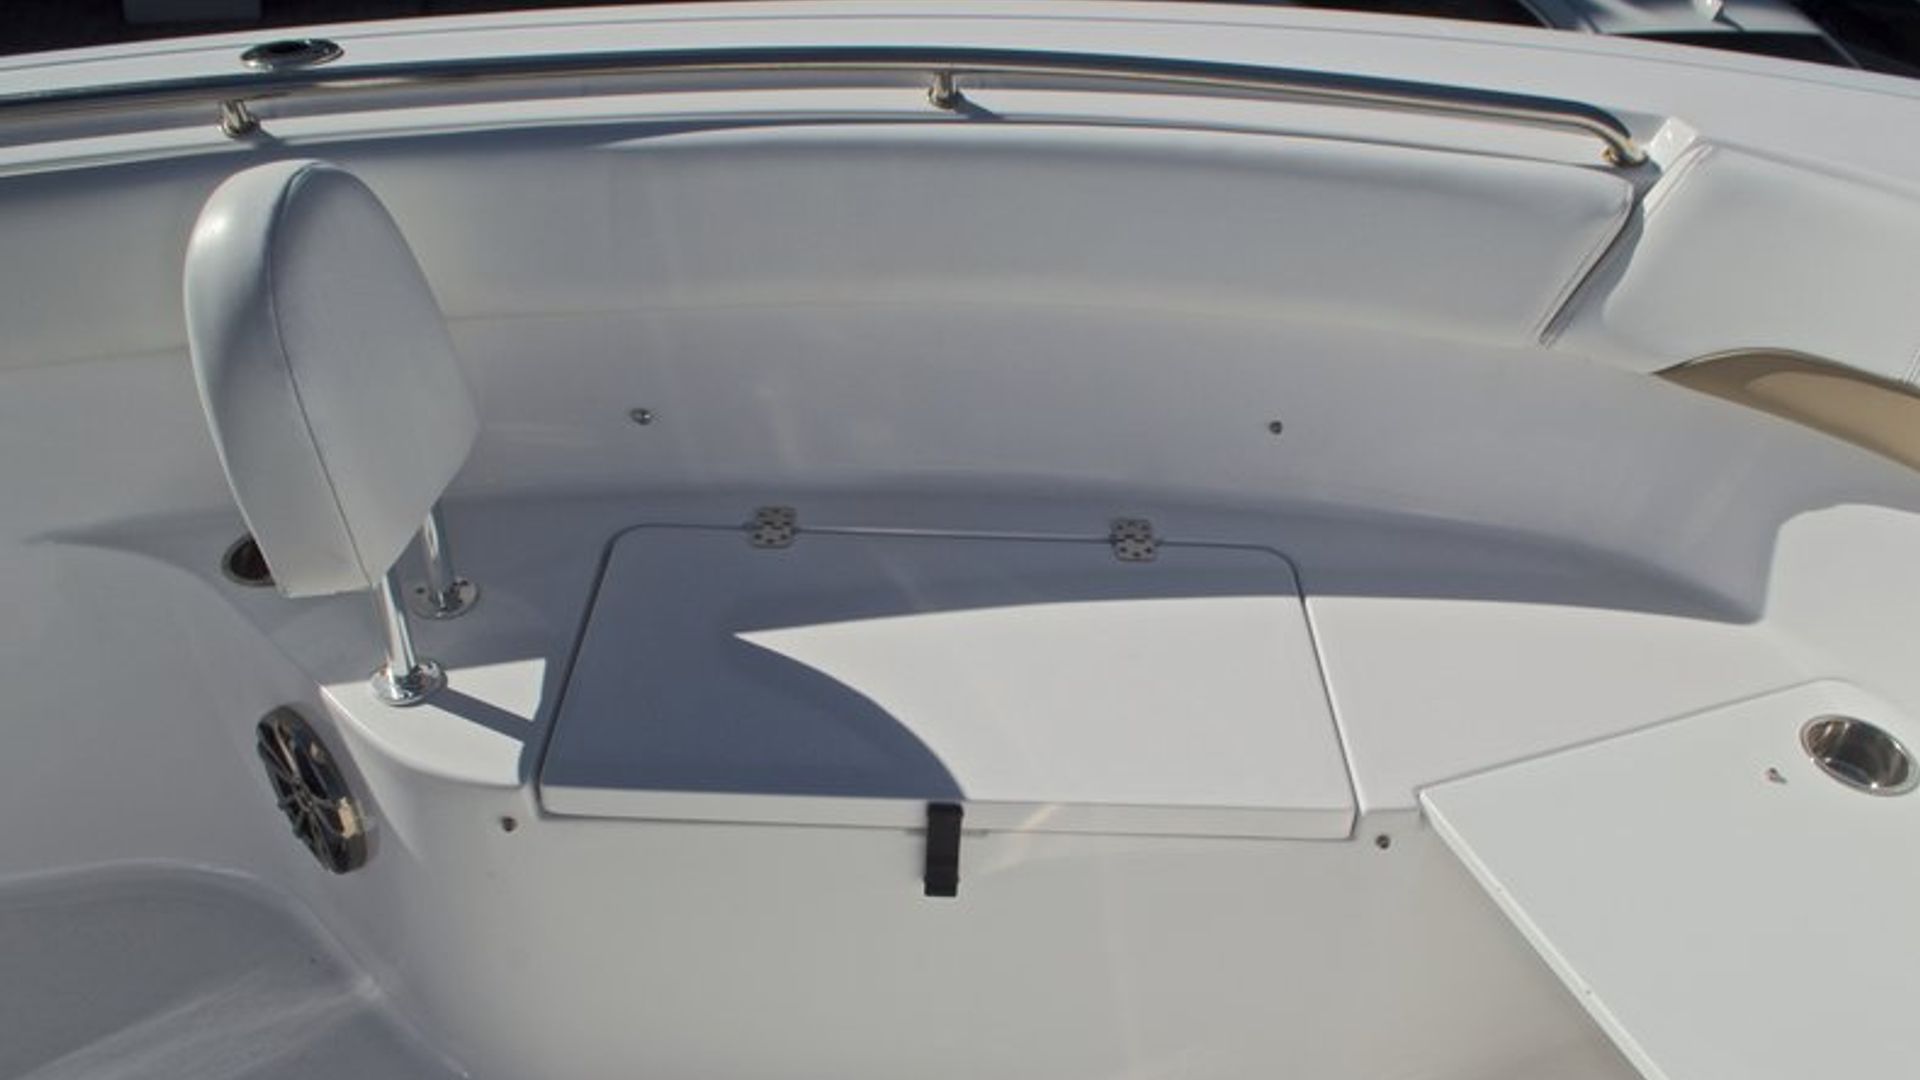 Used 2015 Sportsman Heritage 251 Center Console #H239 image 55